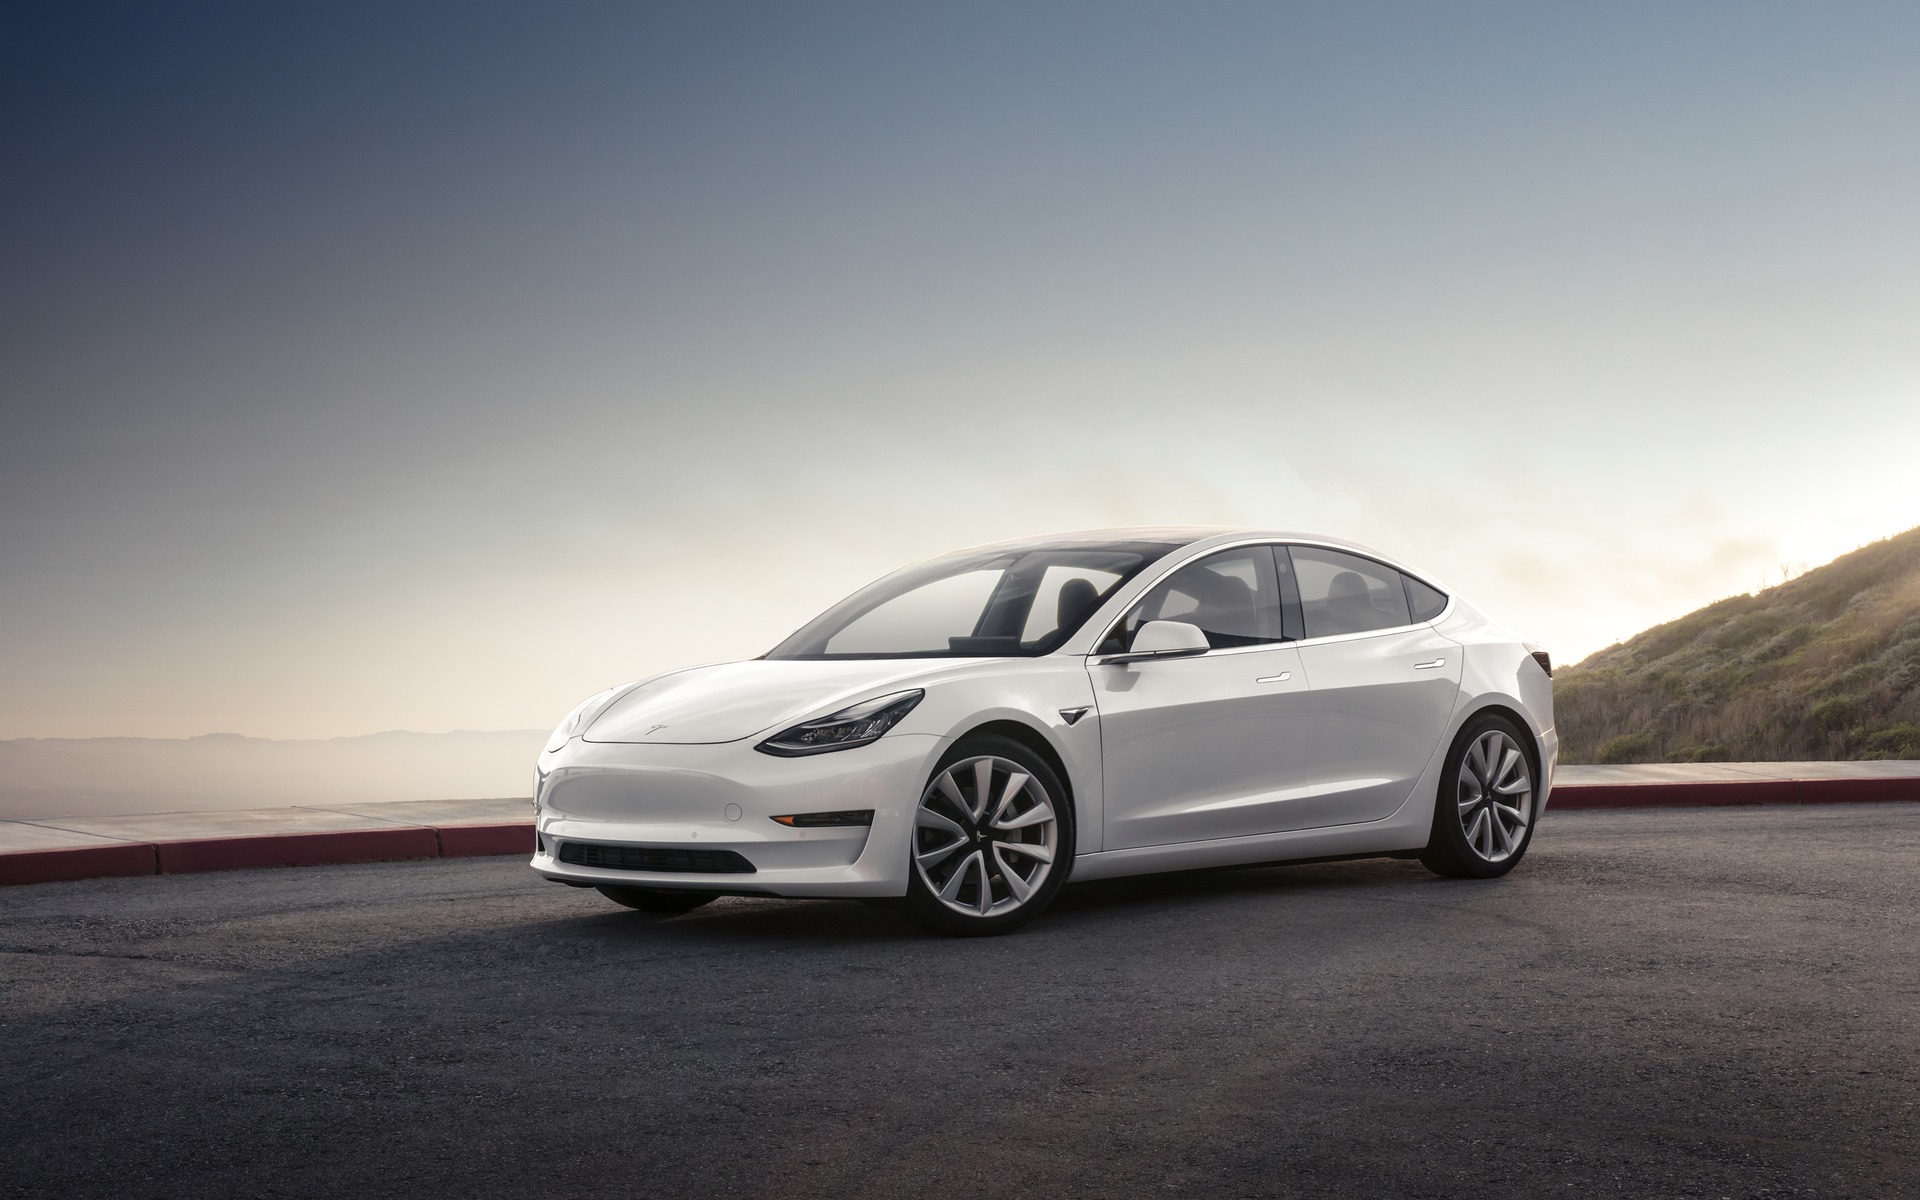 tesla-model-3-adds-lower-priced-trim-to-qualify-for-federal-rebate-2-8